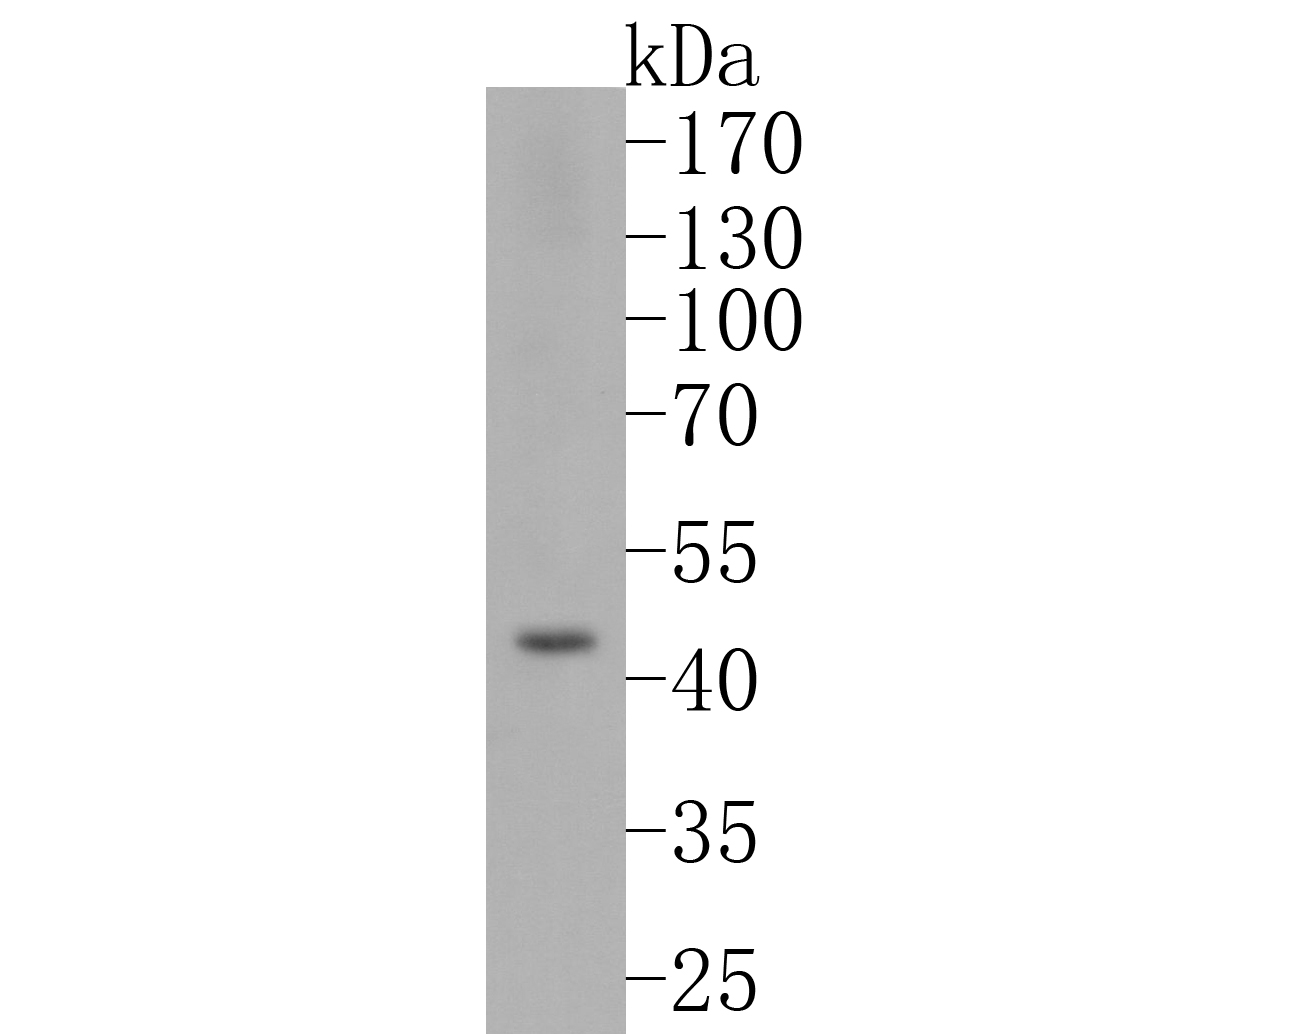 Western blot analysis of FOXP3 on K562 cell lysates. Proteins were transferred to a PVDF membrane and blocked with 5% BSA in PBS for 1 hour at room temperature. The primary antibody (ET1702-12, 1/500) was used in 5% BSA at room temperature for 2 hours. Goat Anti-Rabbit IgG - HRP Secondary Antibody (HA1001) at 1:200,000 dilution was used for 1 hour at room temperature.